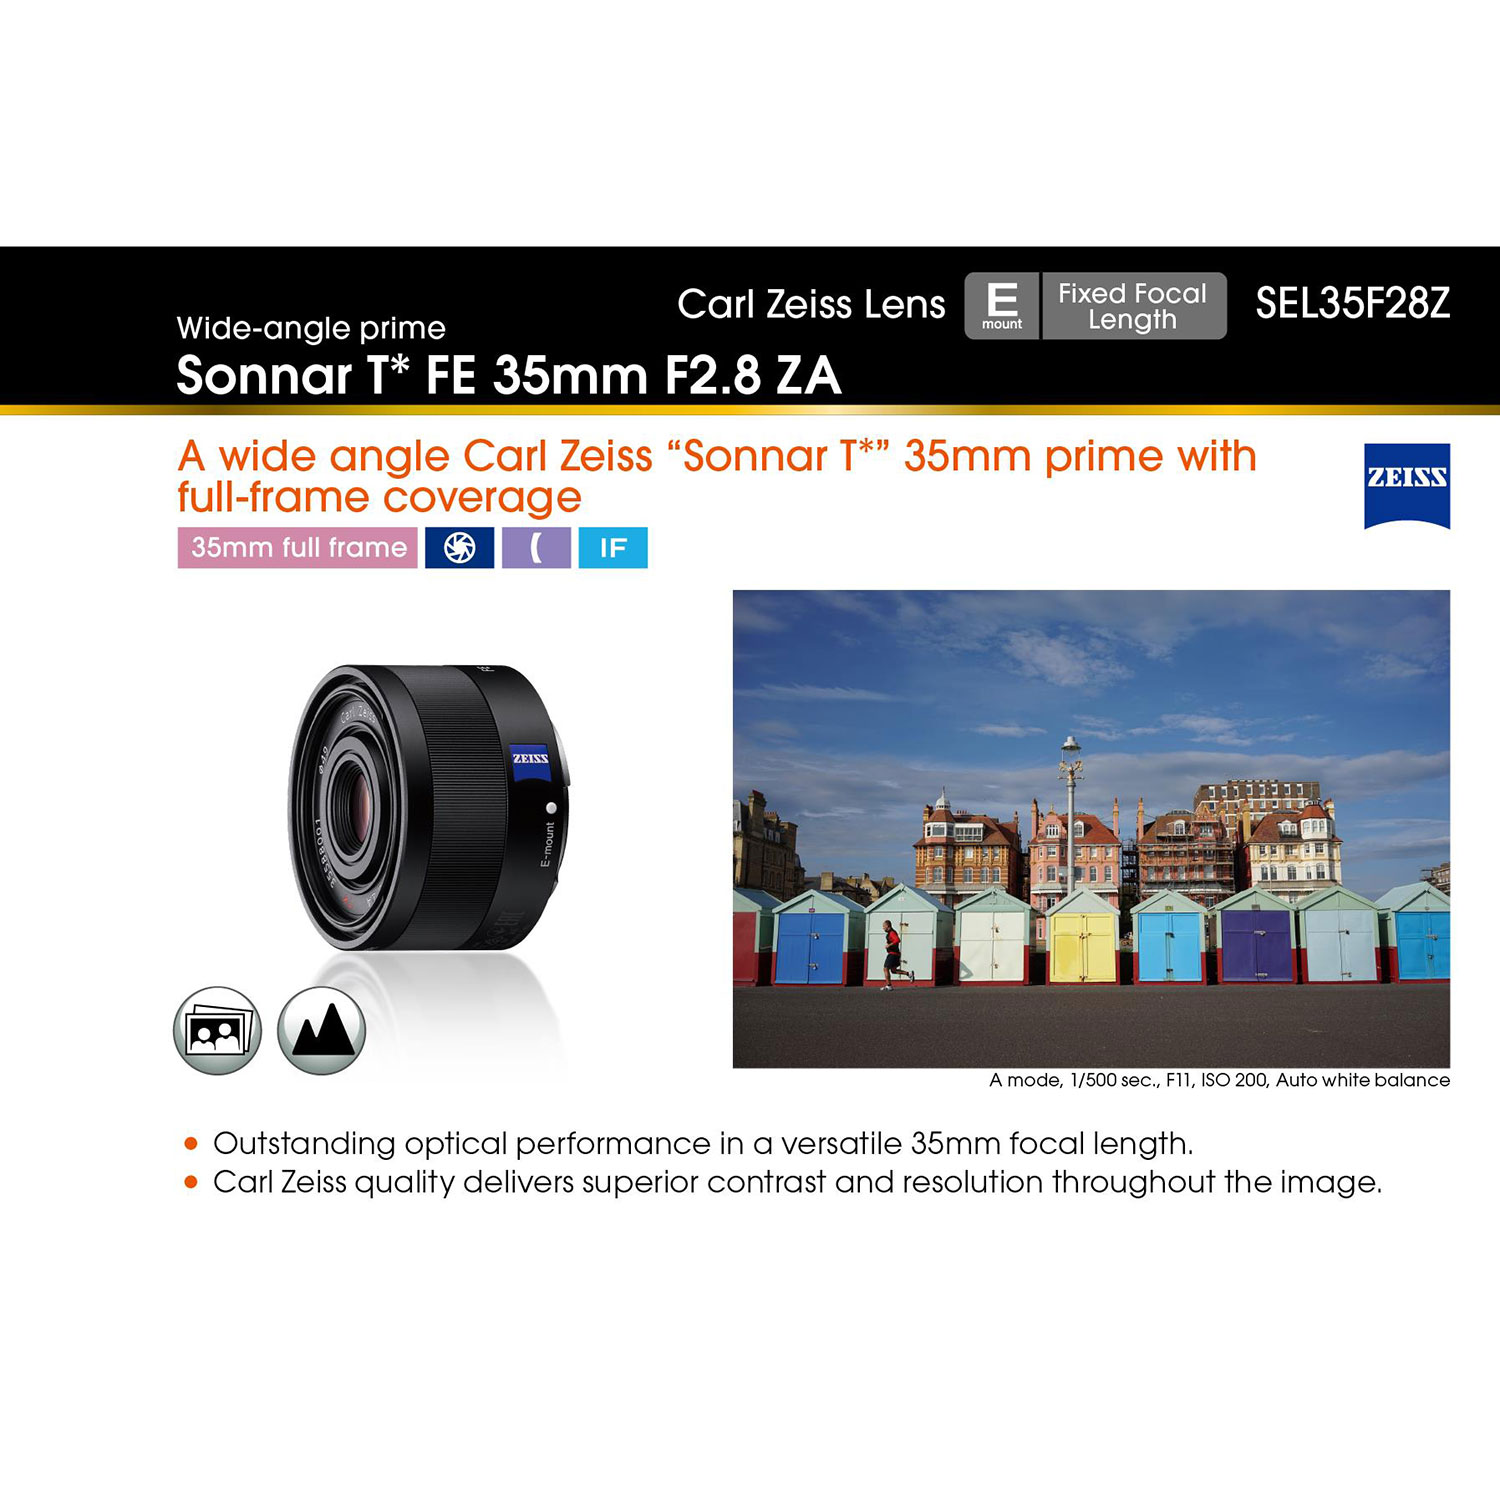 Sony E-Mount Full-Frame FE Sonnar T 35mm f/2.8 ZEISS Wide Angle